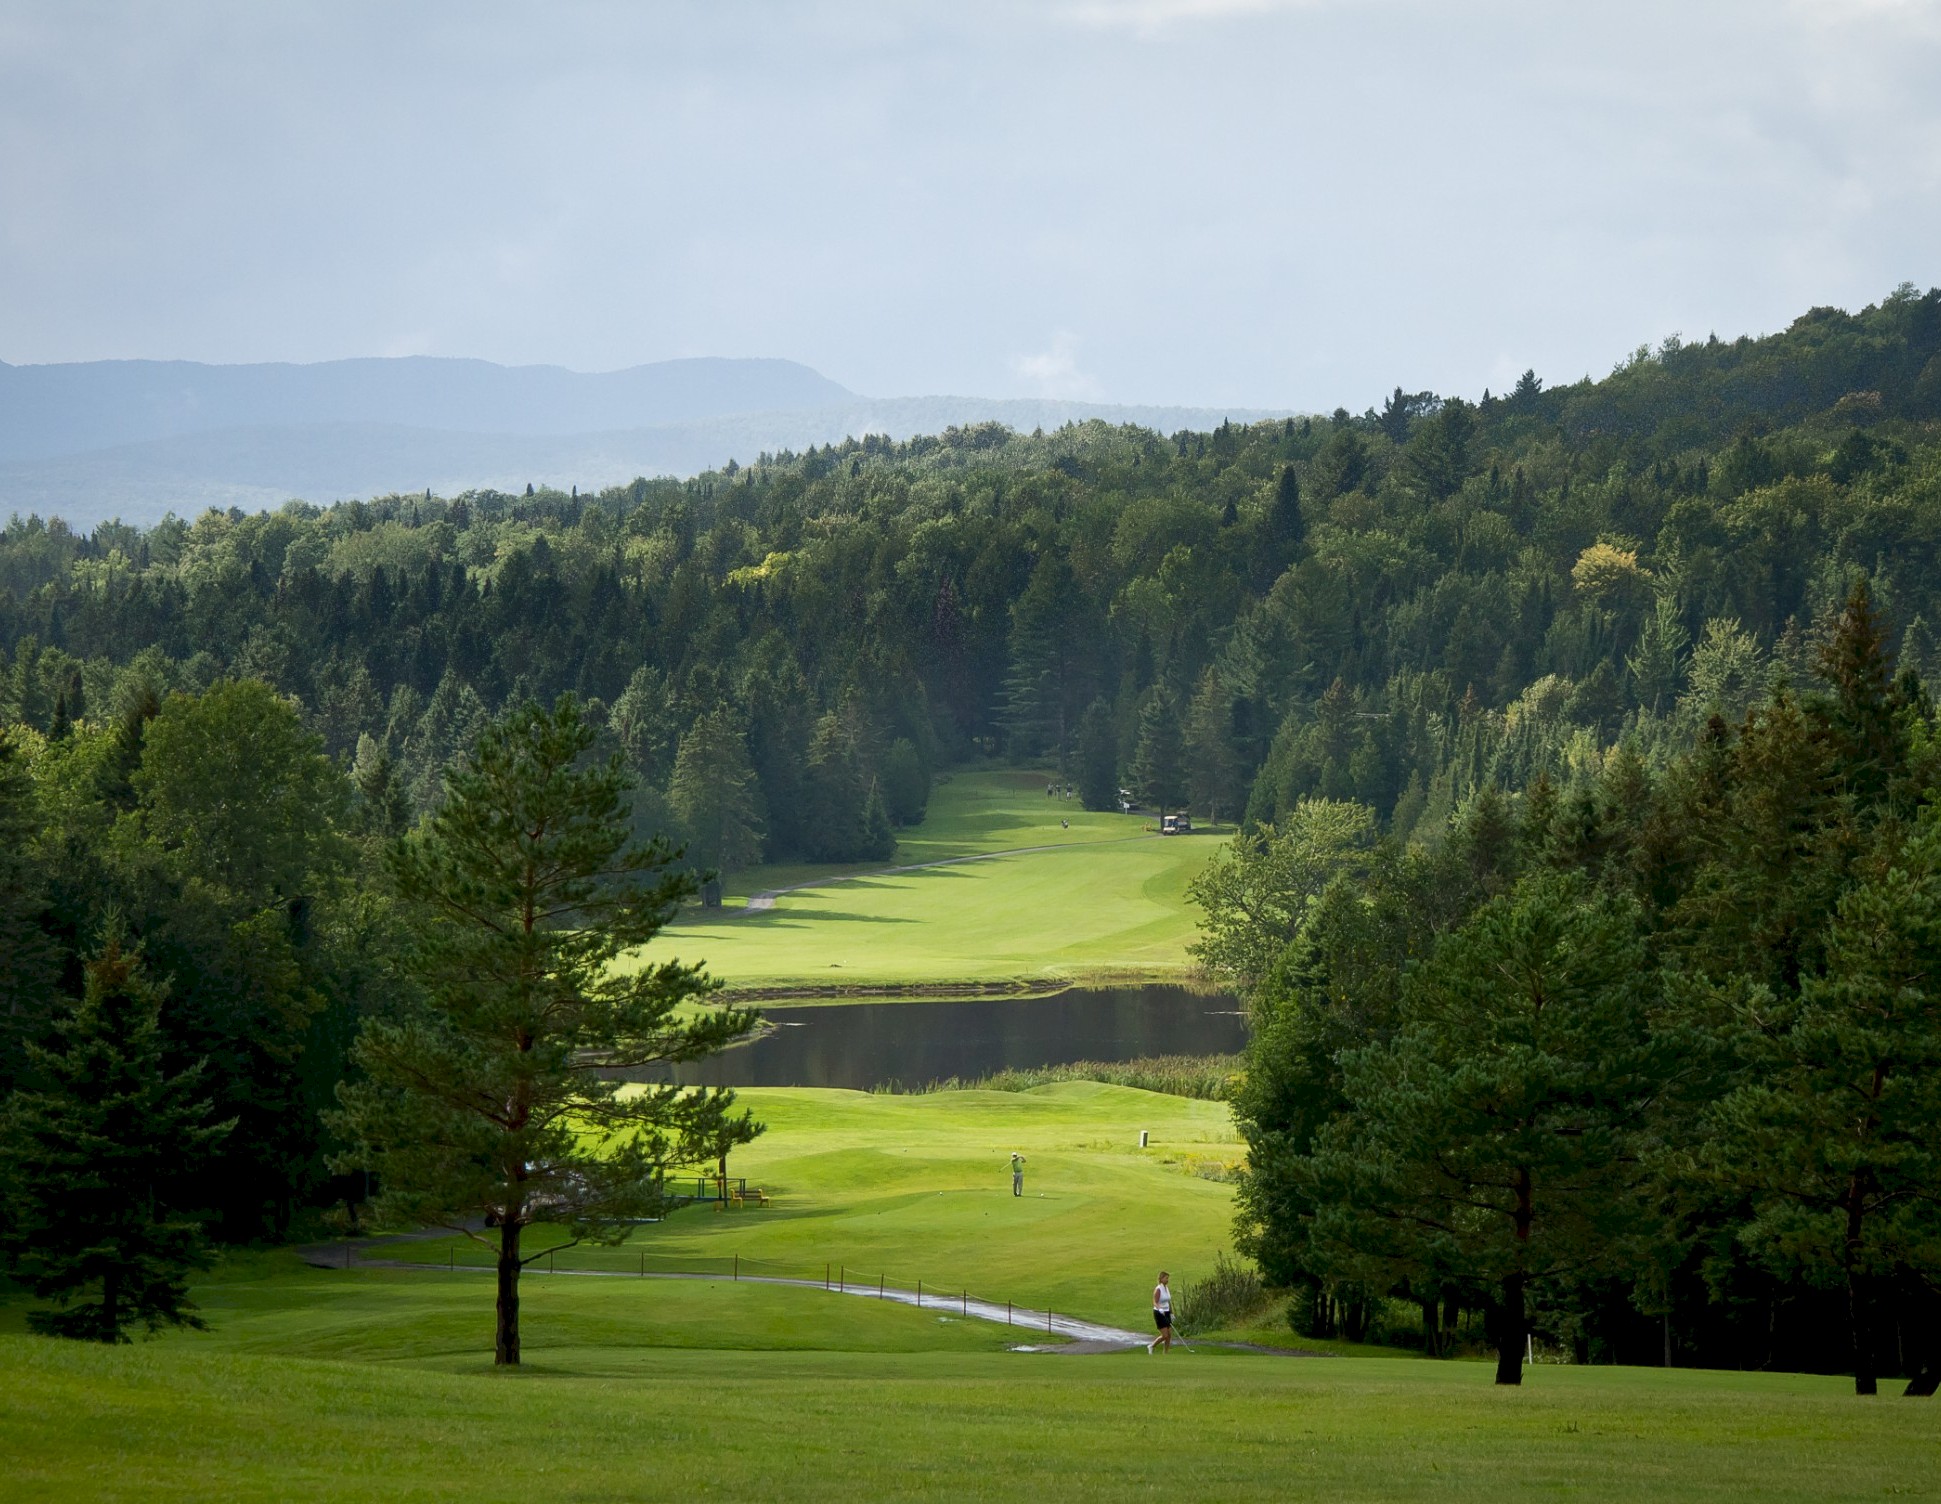 Golf course in the heart of forests and mountains